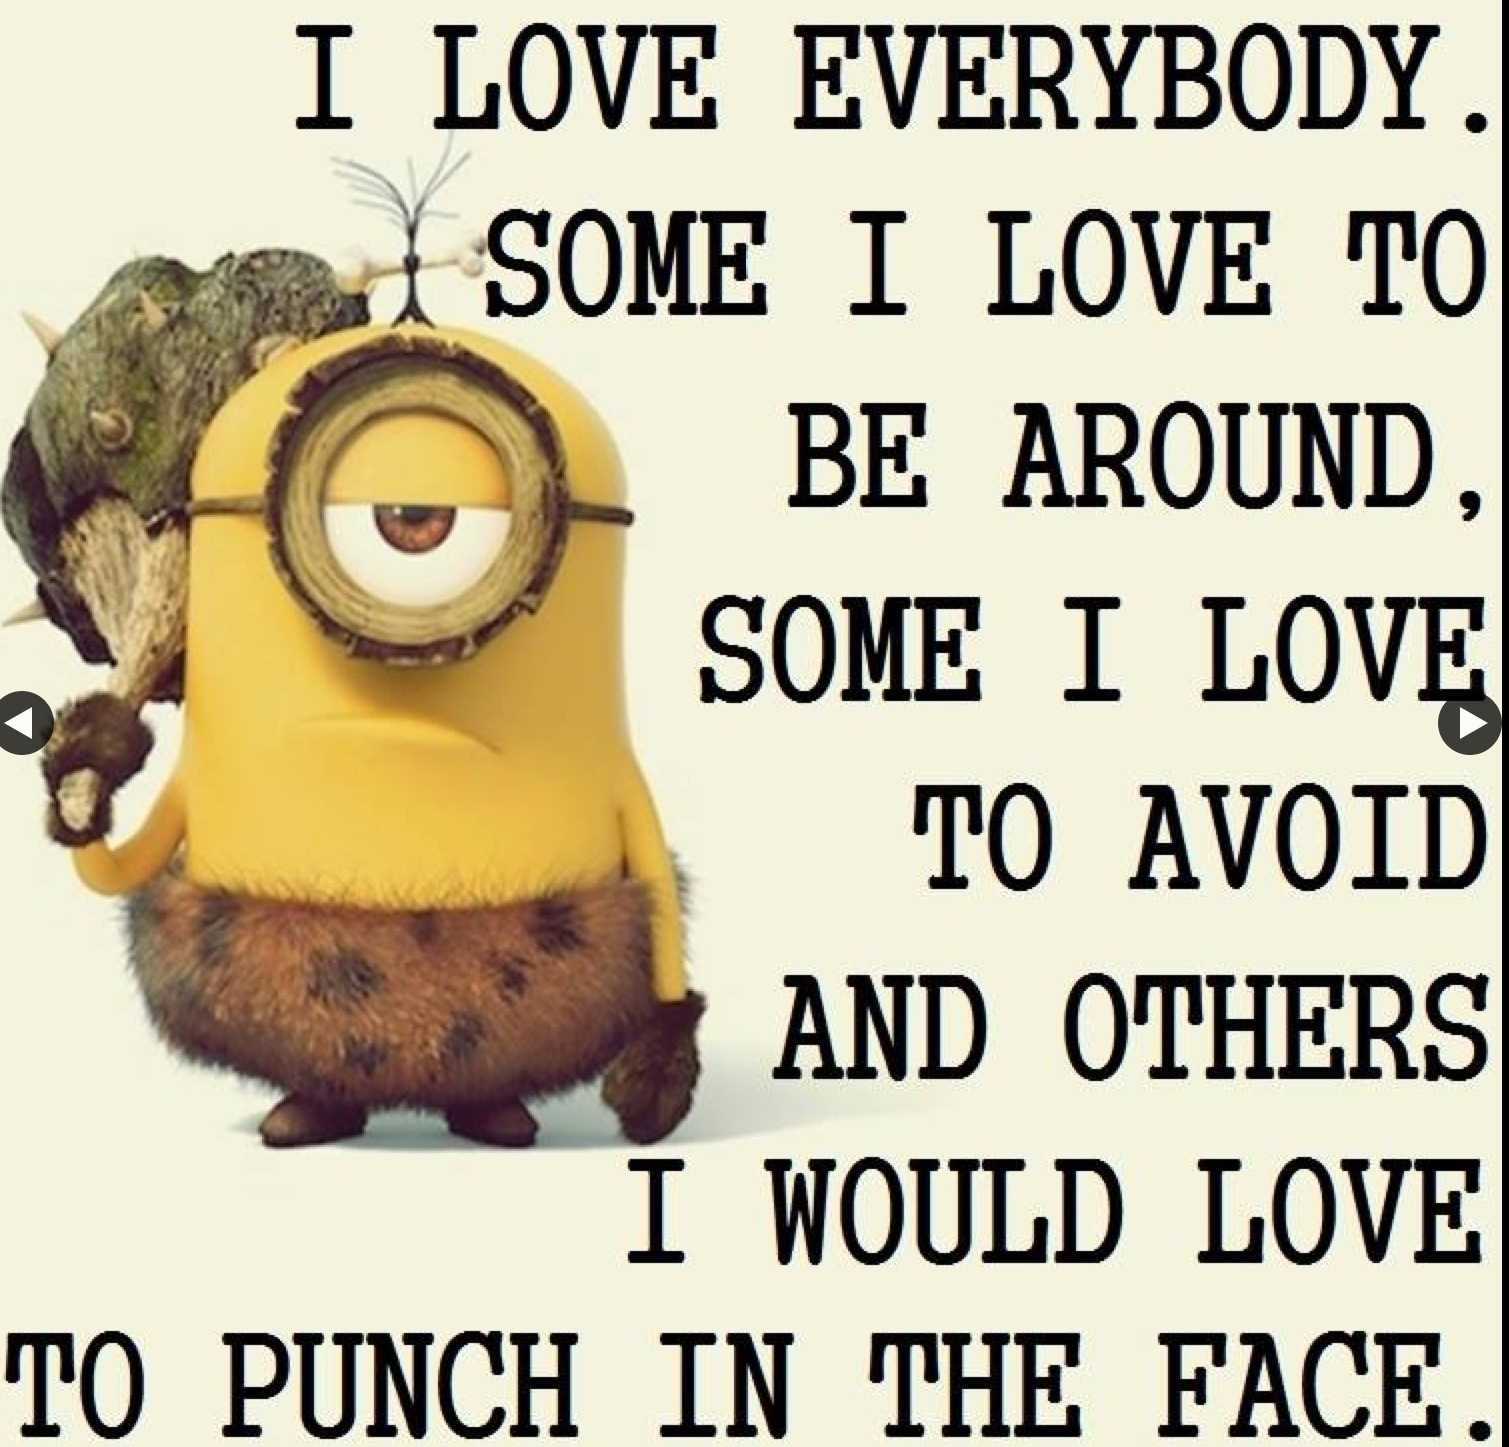 22 New Silly Minion Quotes The Funny Beaver